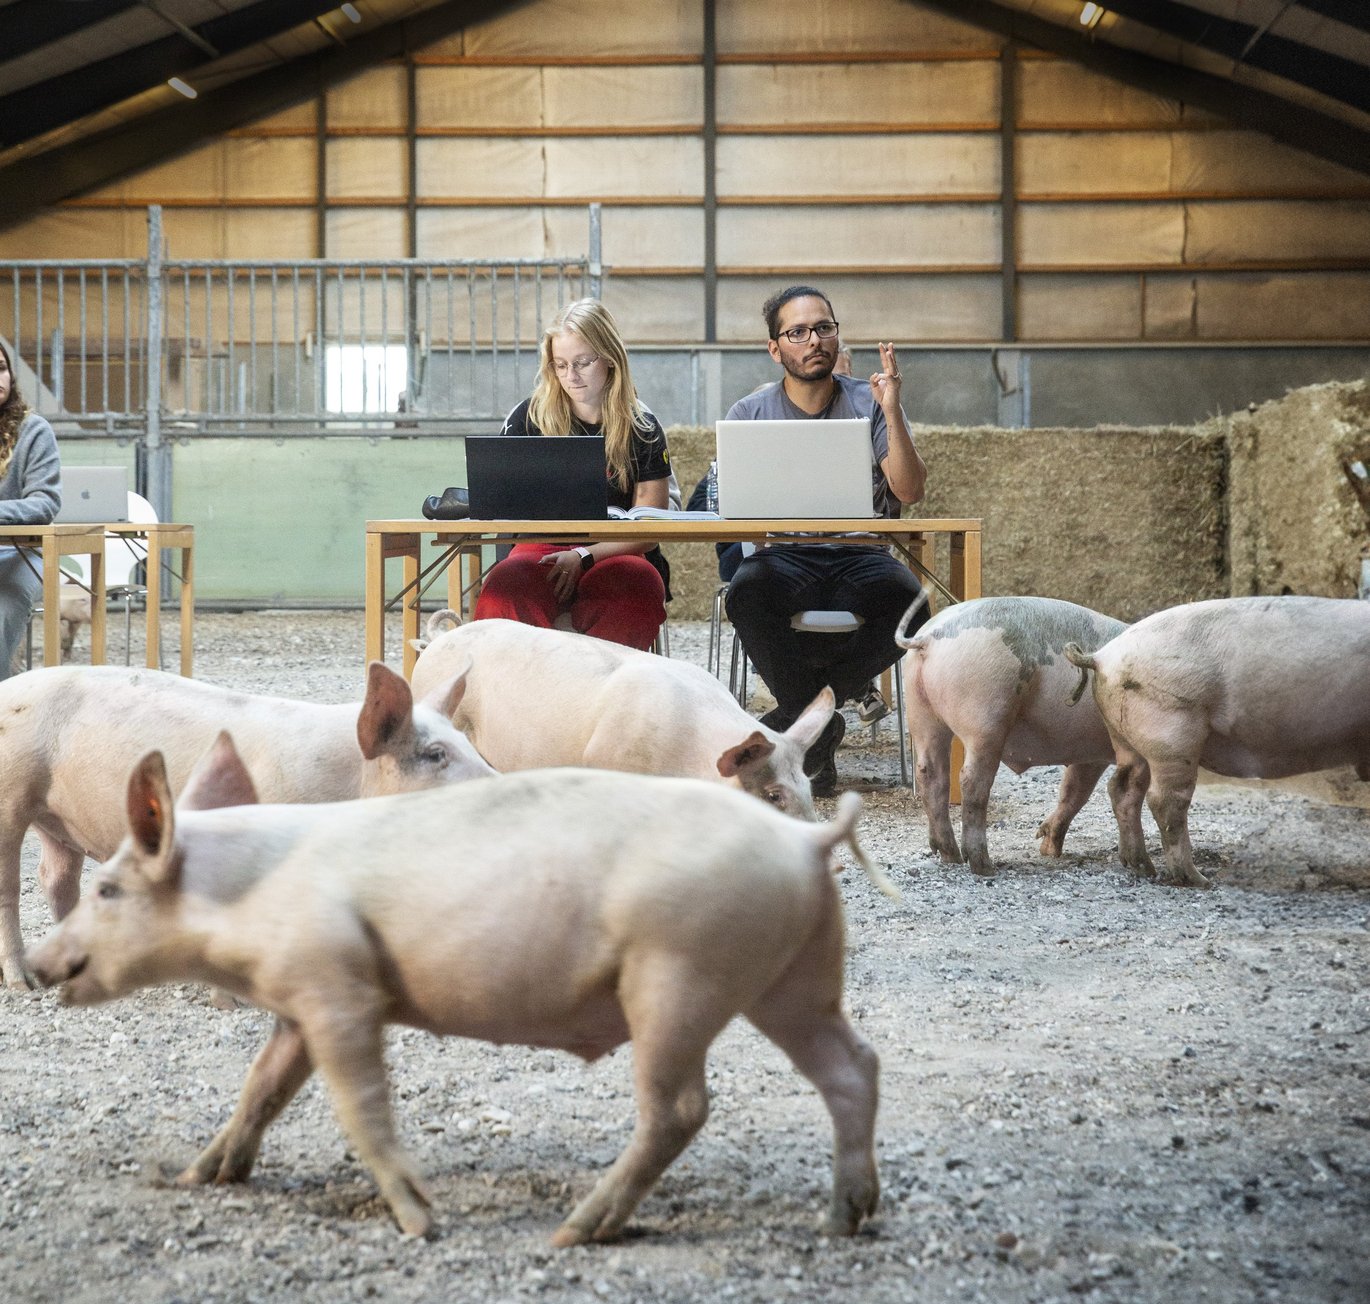 Pigs with two students sitting at a desk in a stable in Viborg